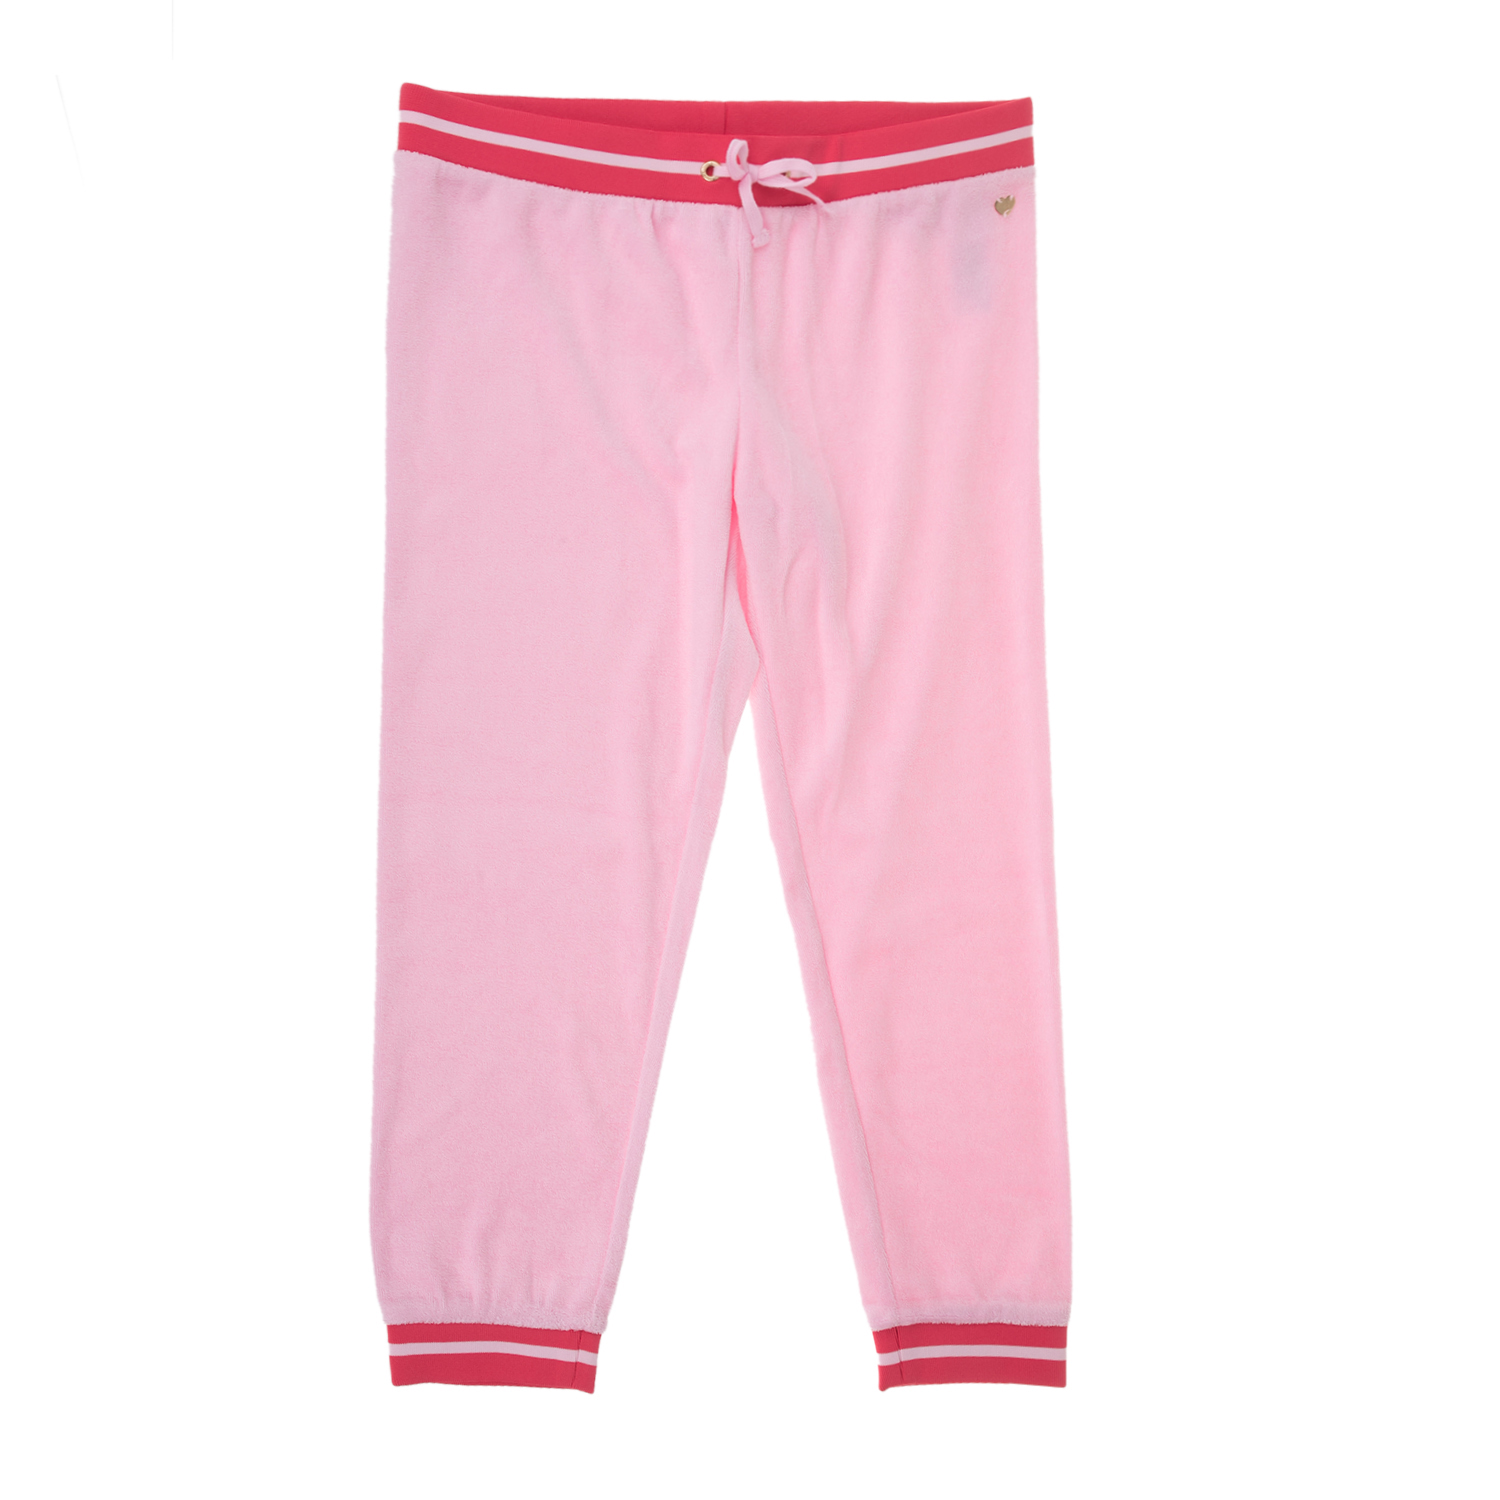 JUICY COUTURE KIDS - Κοριτσίστικο παντελόνι φόρμας JUICY COUTURE MICROTERRY LA SUNSET ροζ Παιδικά/Girls/Ρούχα/Παντελόνια